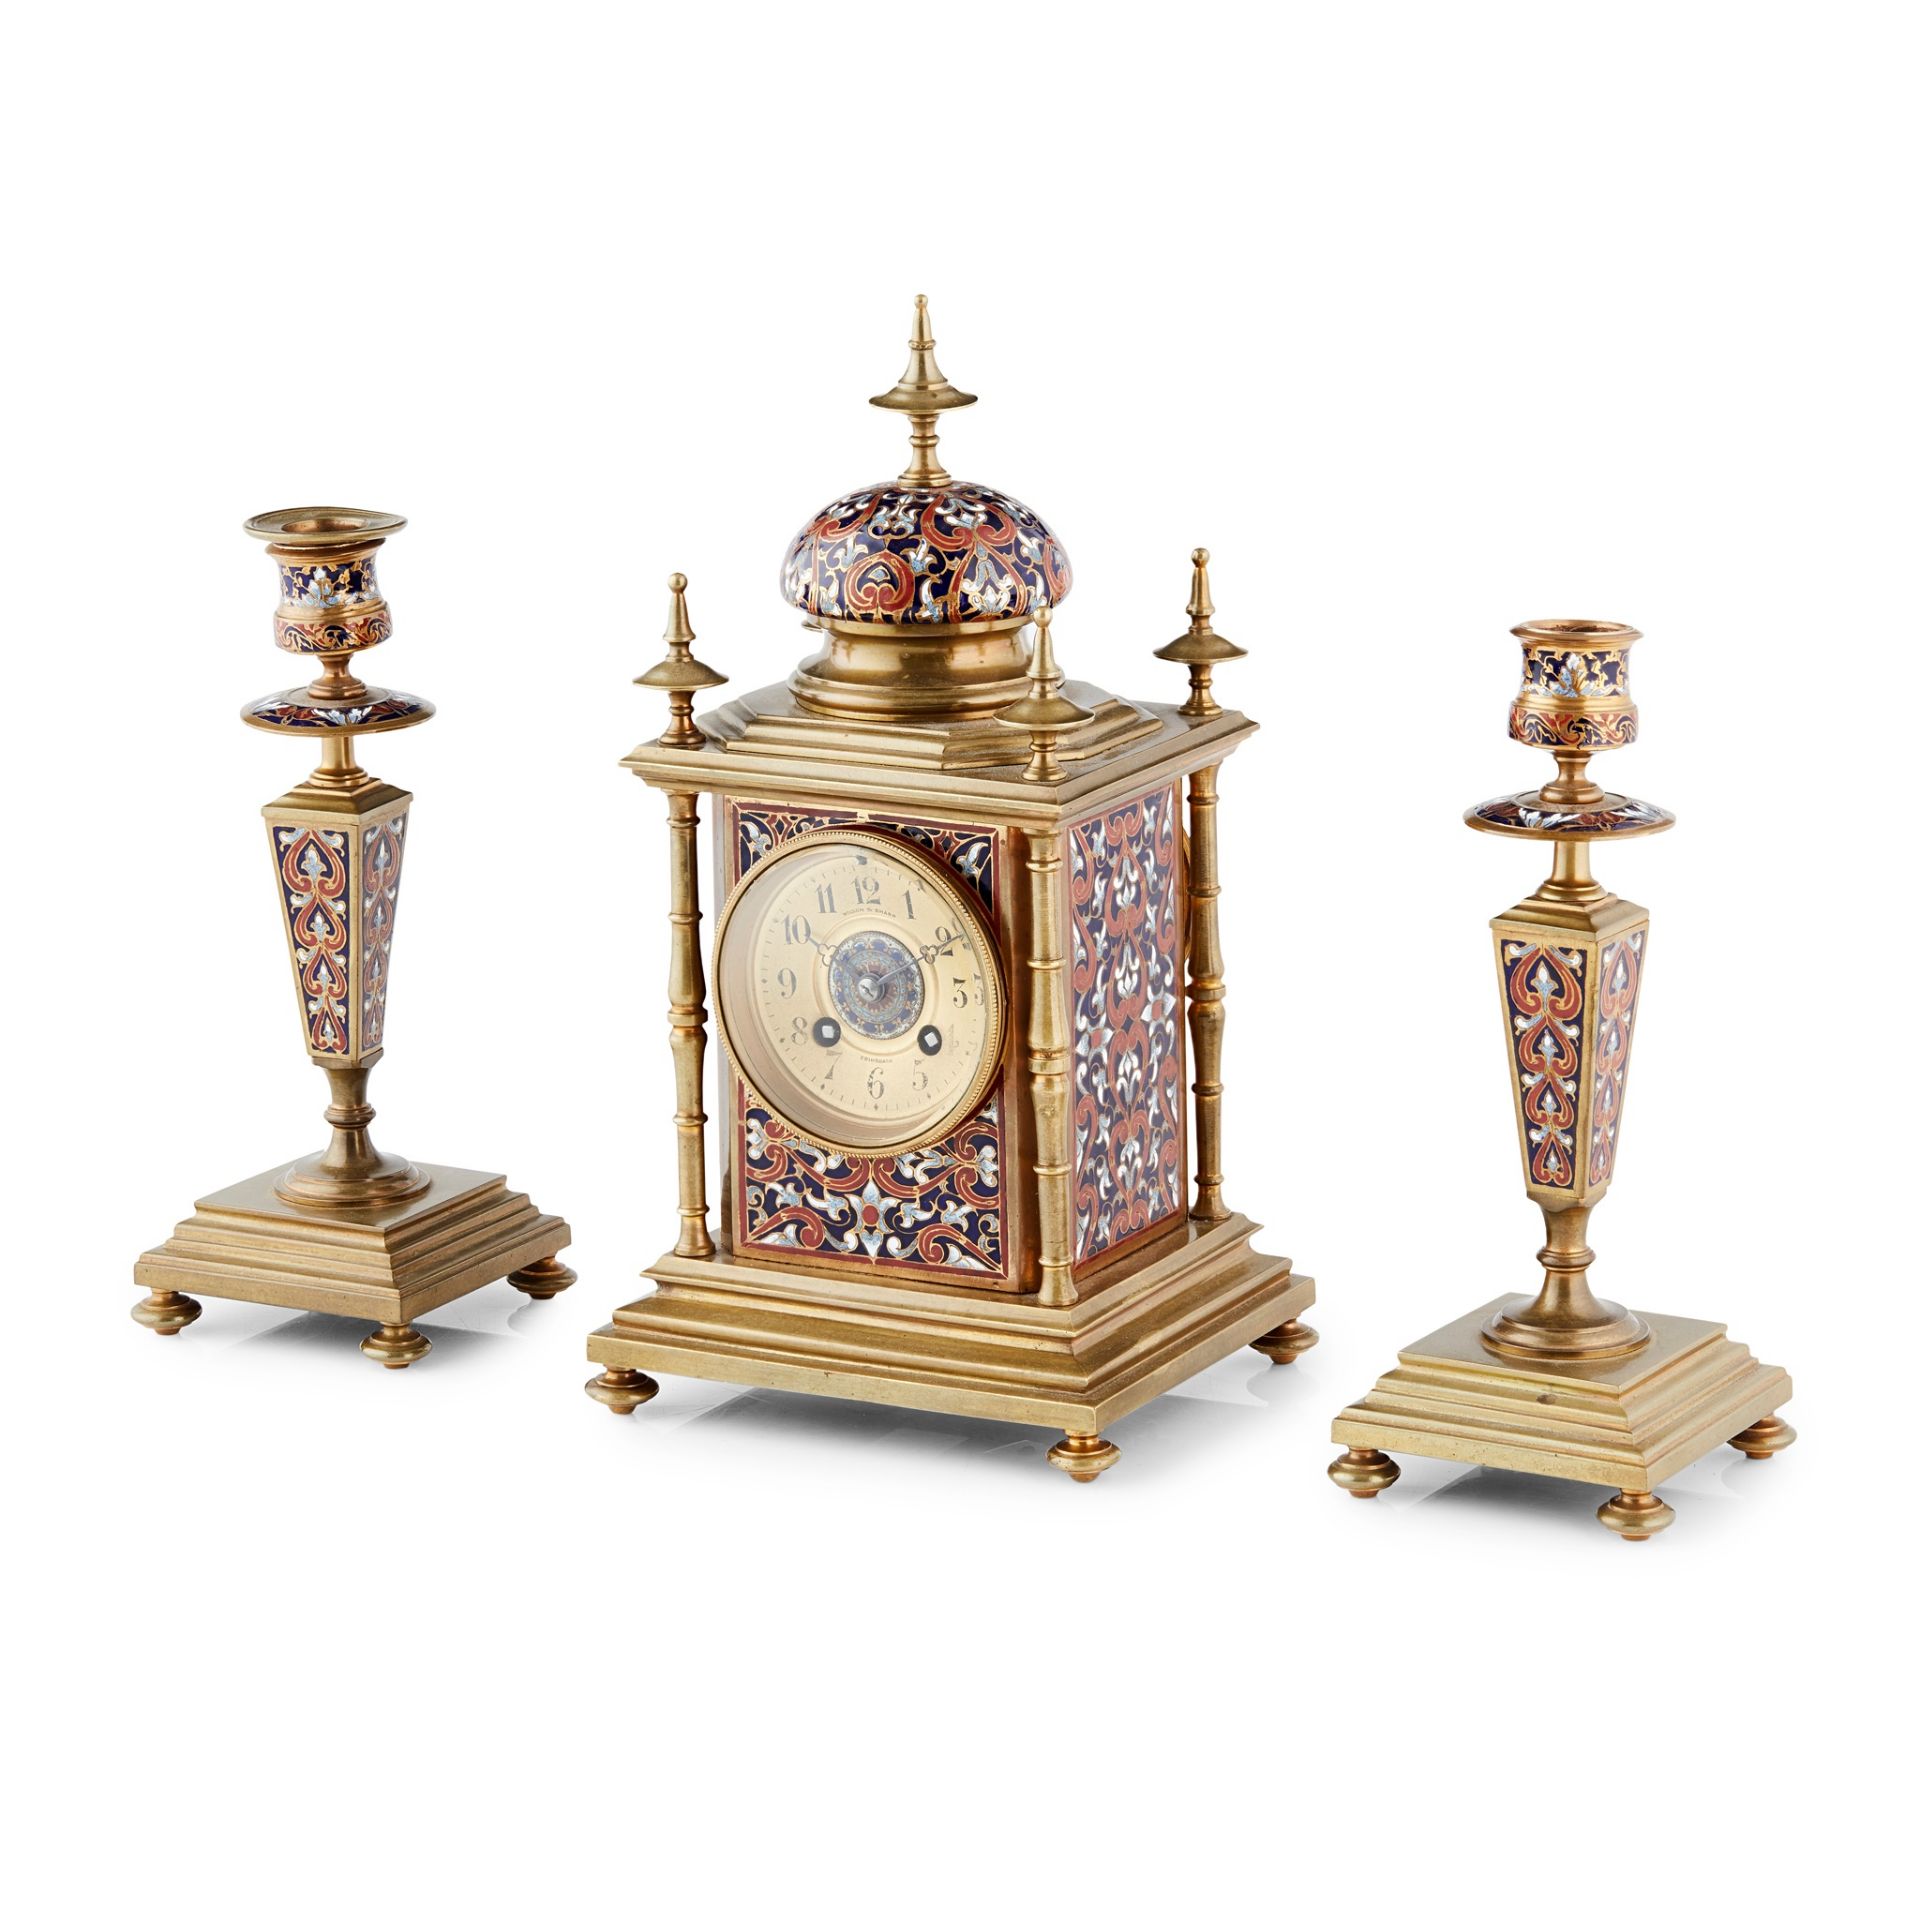 FRENCH CHAMPLEVÉ ENAMEL AND GILT BRASS THREE PIECE CLOCK GARNITURE 19TH CENTURY - Image 2 of 2